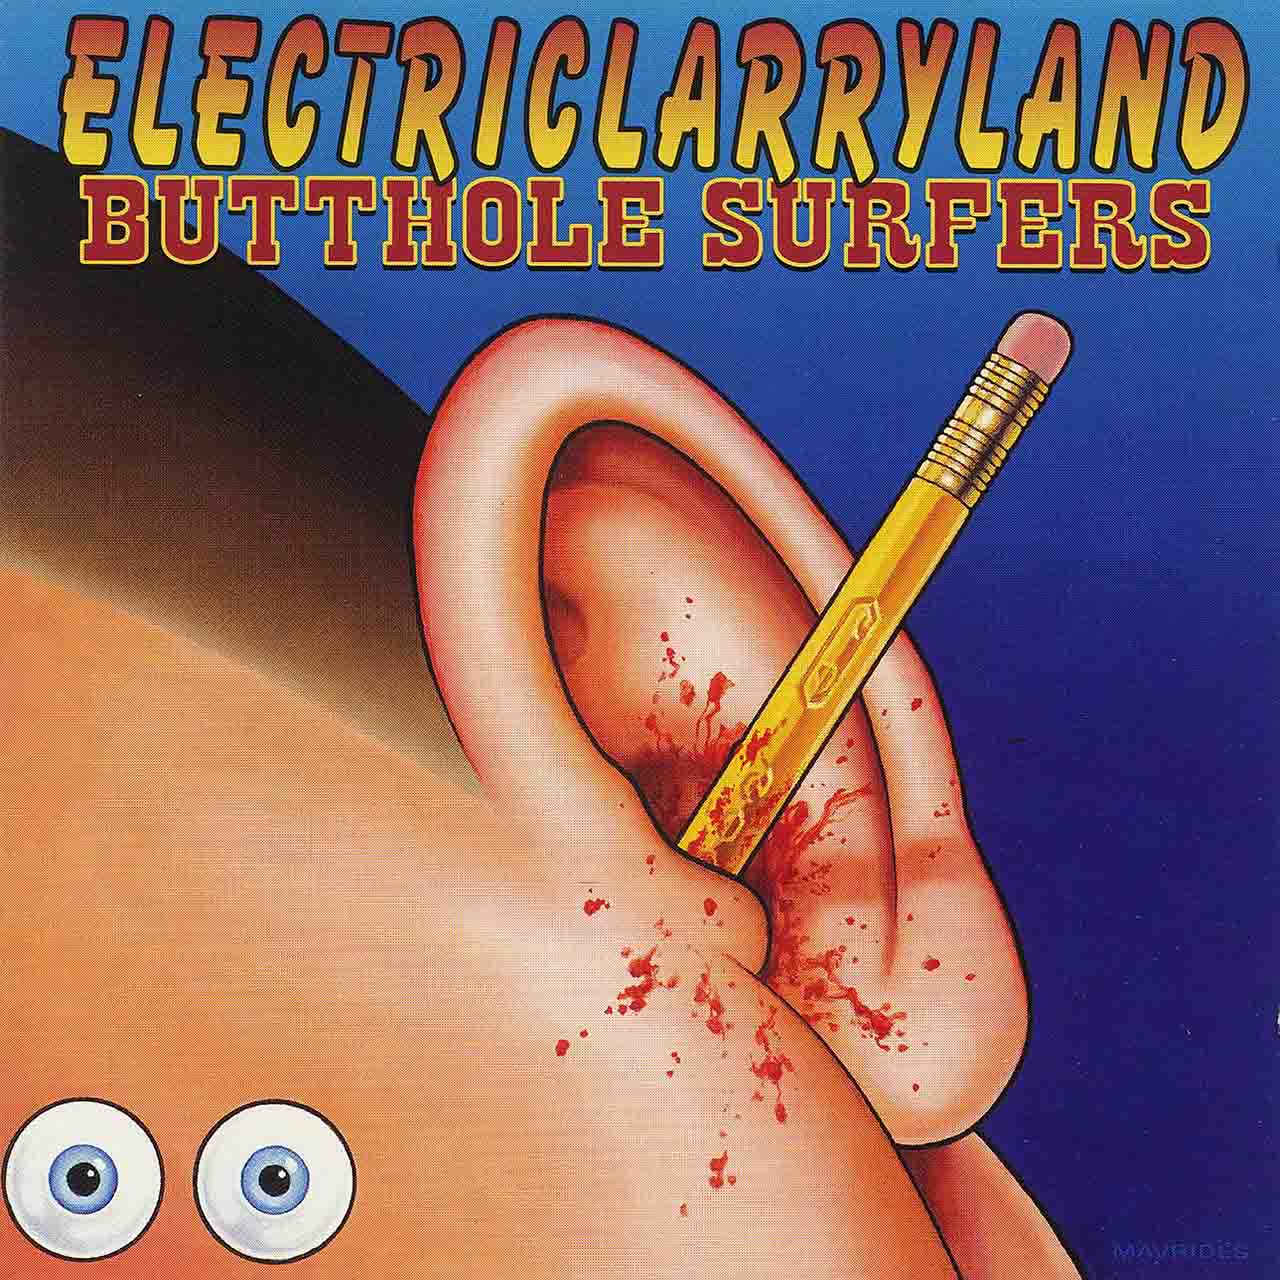 ‘Electriclarryland’: How the Butthole Surfers Scored an Unlikely Hit